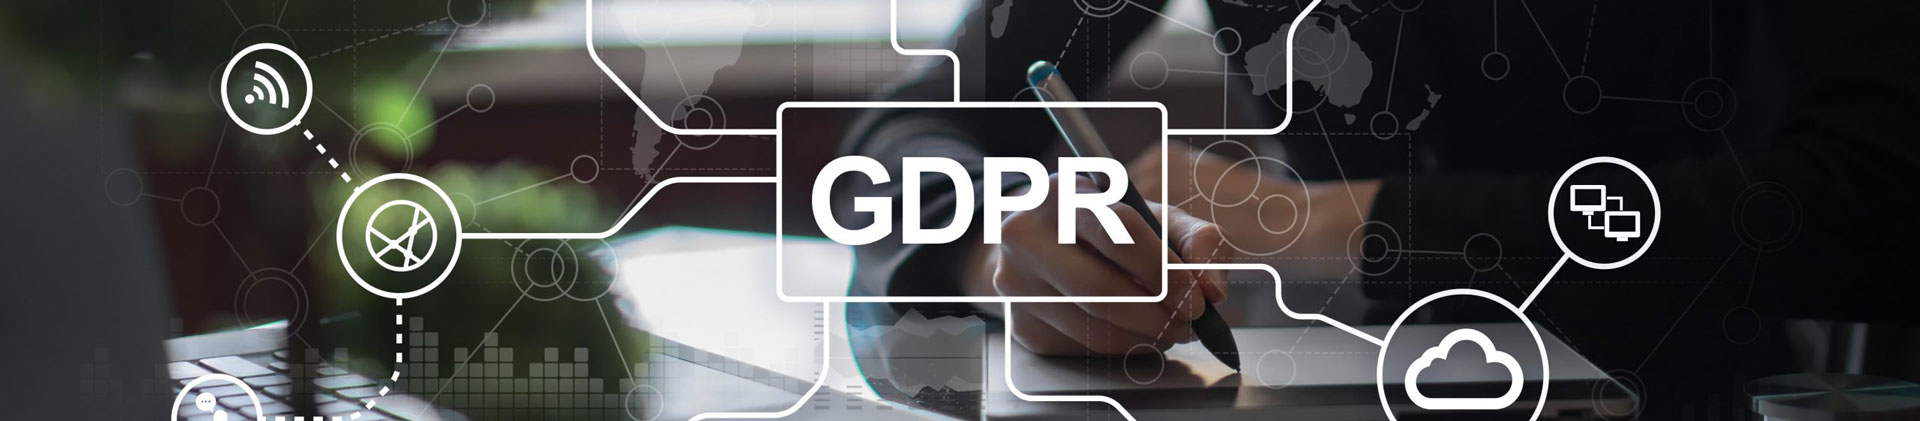 GDPR on Cloud Service Providers